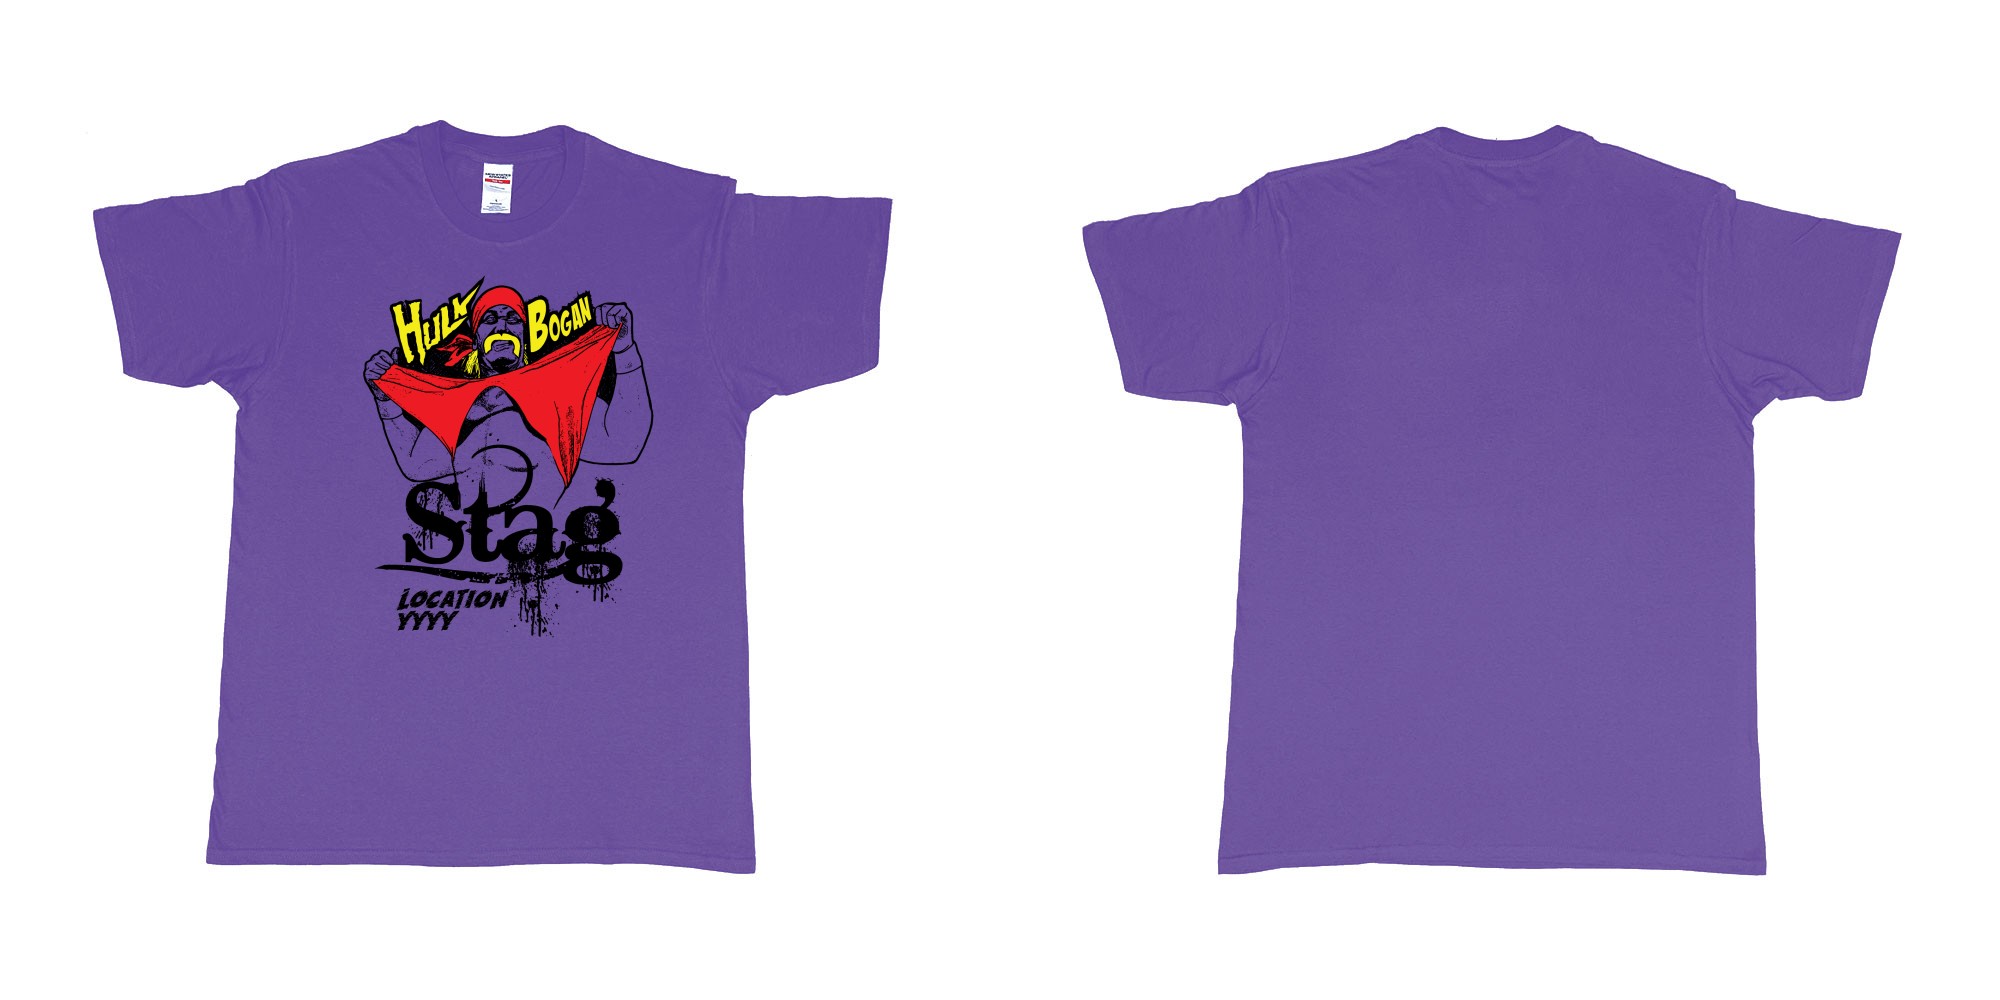 Custom tshirt design hulk hogan bogan in fabric color purple choice your own text made in Bali by The Pirate Way